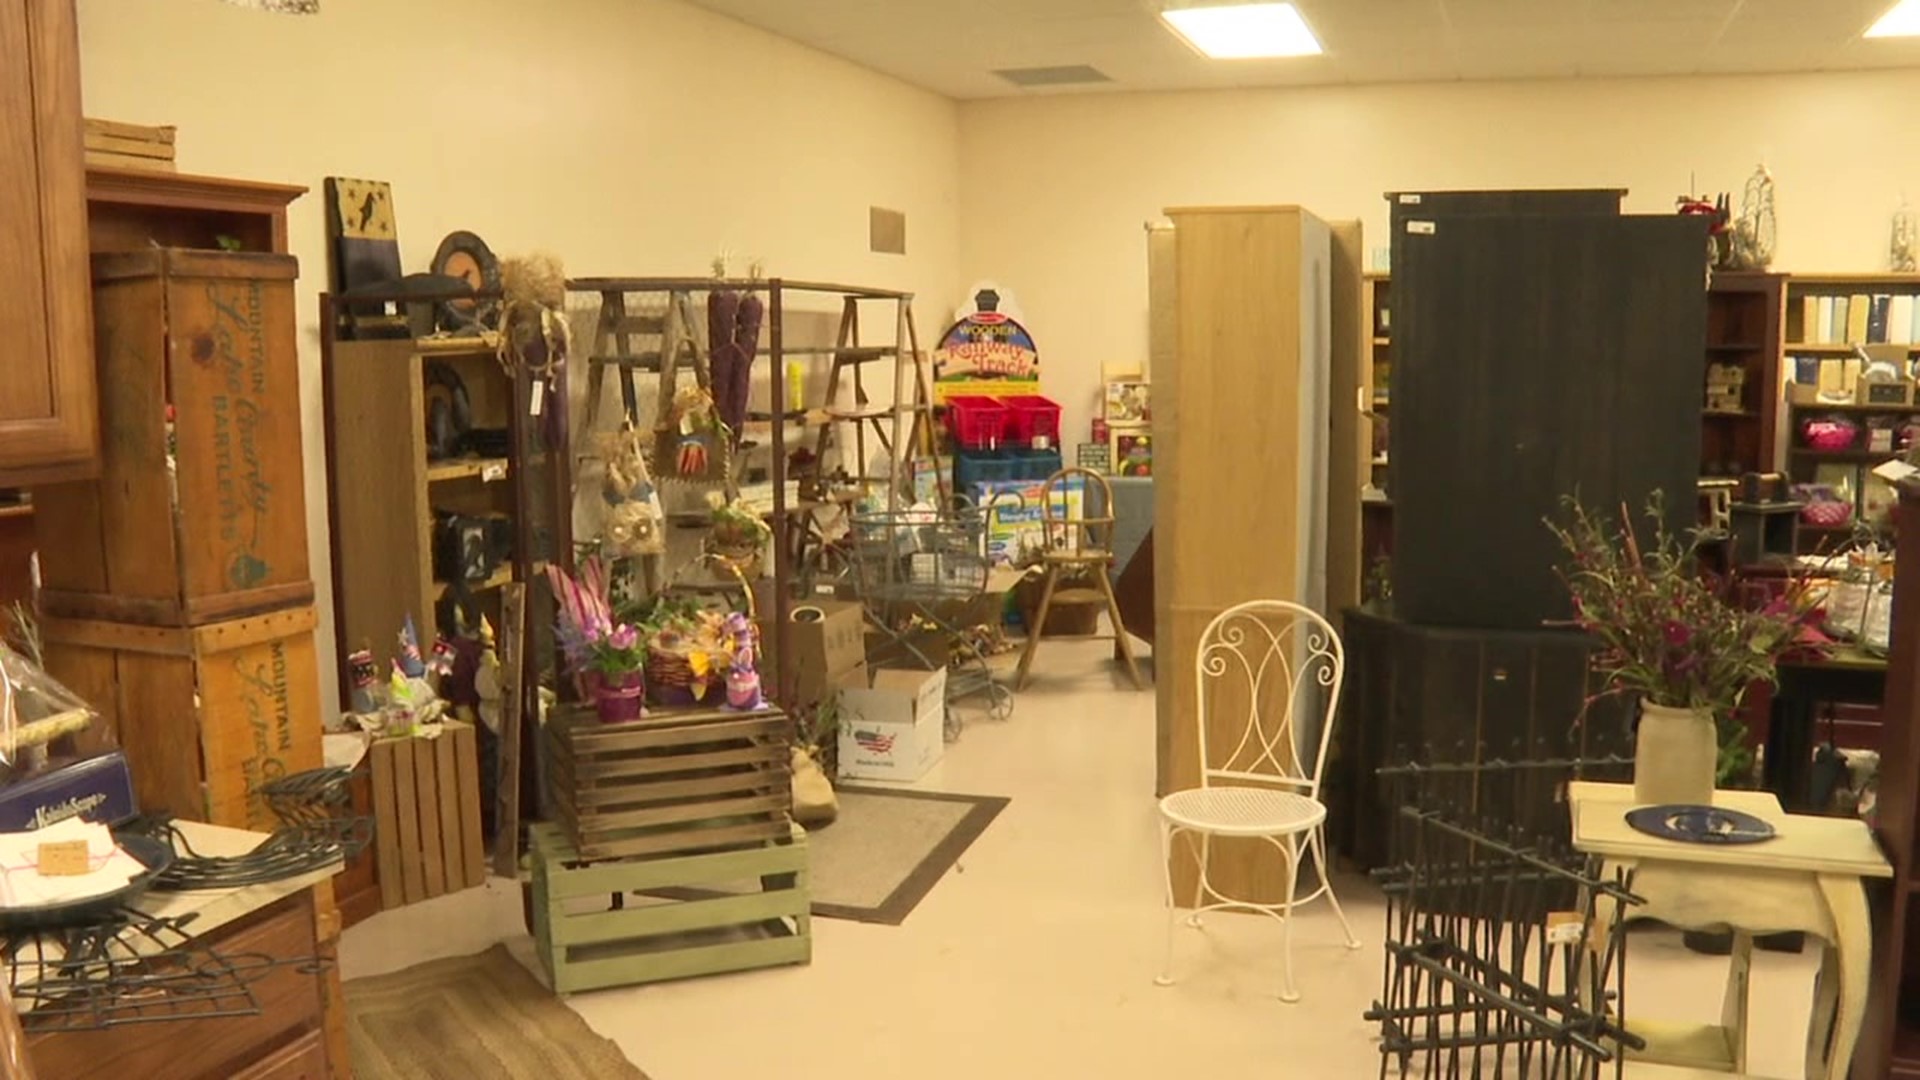 Many small businesses have struggled mightily over the last several months, but there's one in Schuylkill County that's been trending upwards.